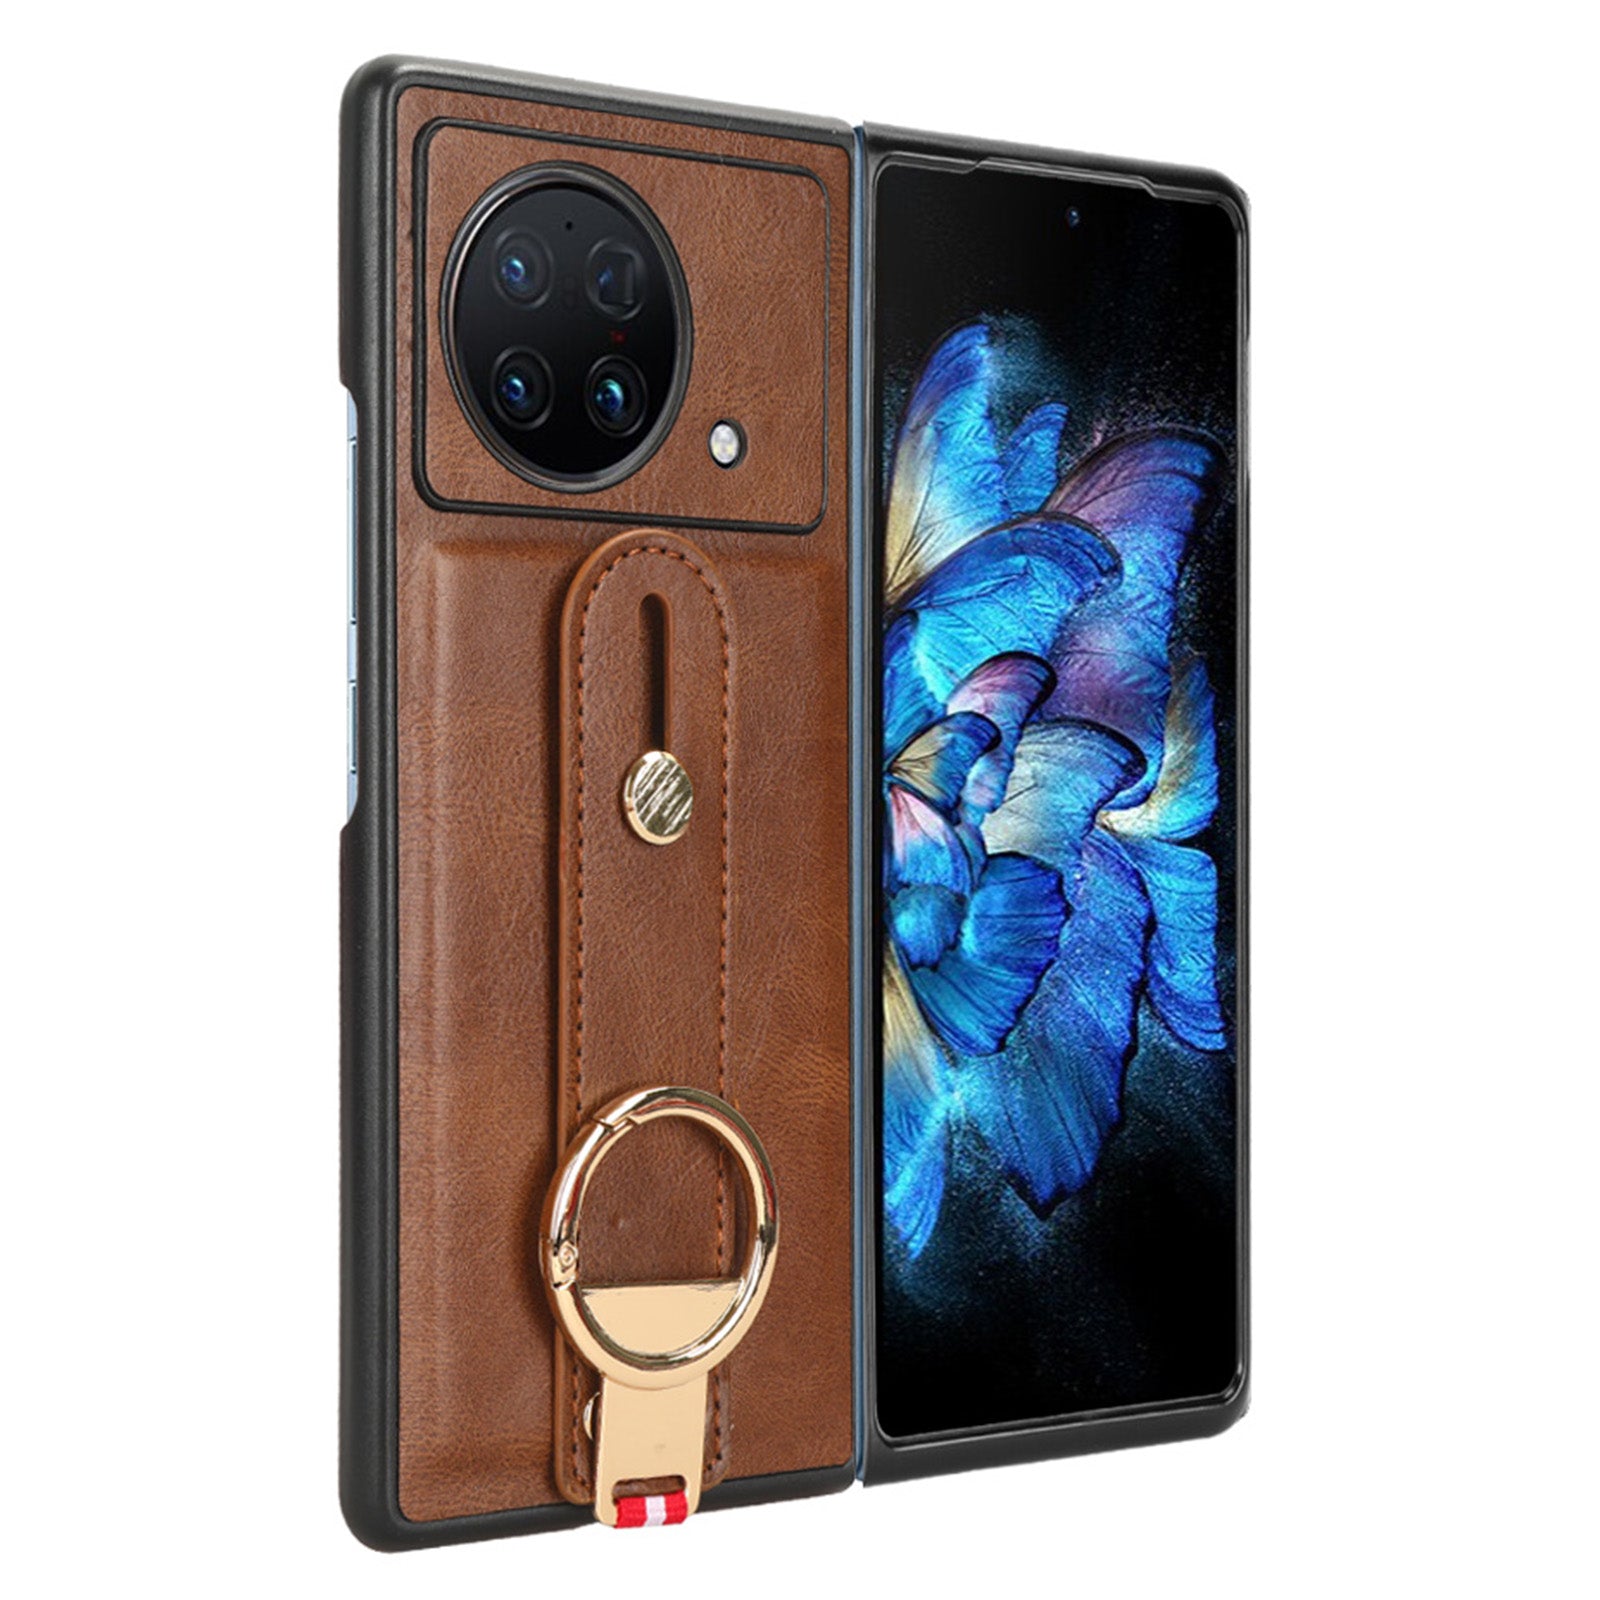 Wristband Phone Cover for vivo X Fold , Leather Coating PC+TPU Case with Neck Strap - Brown